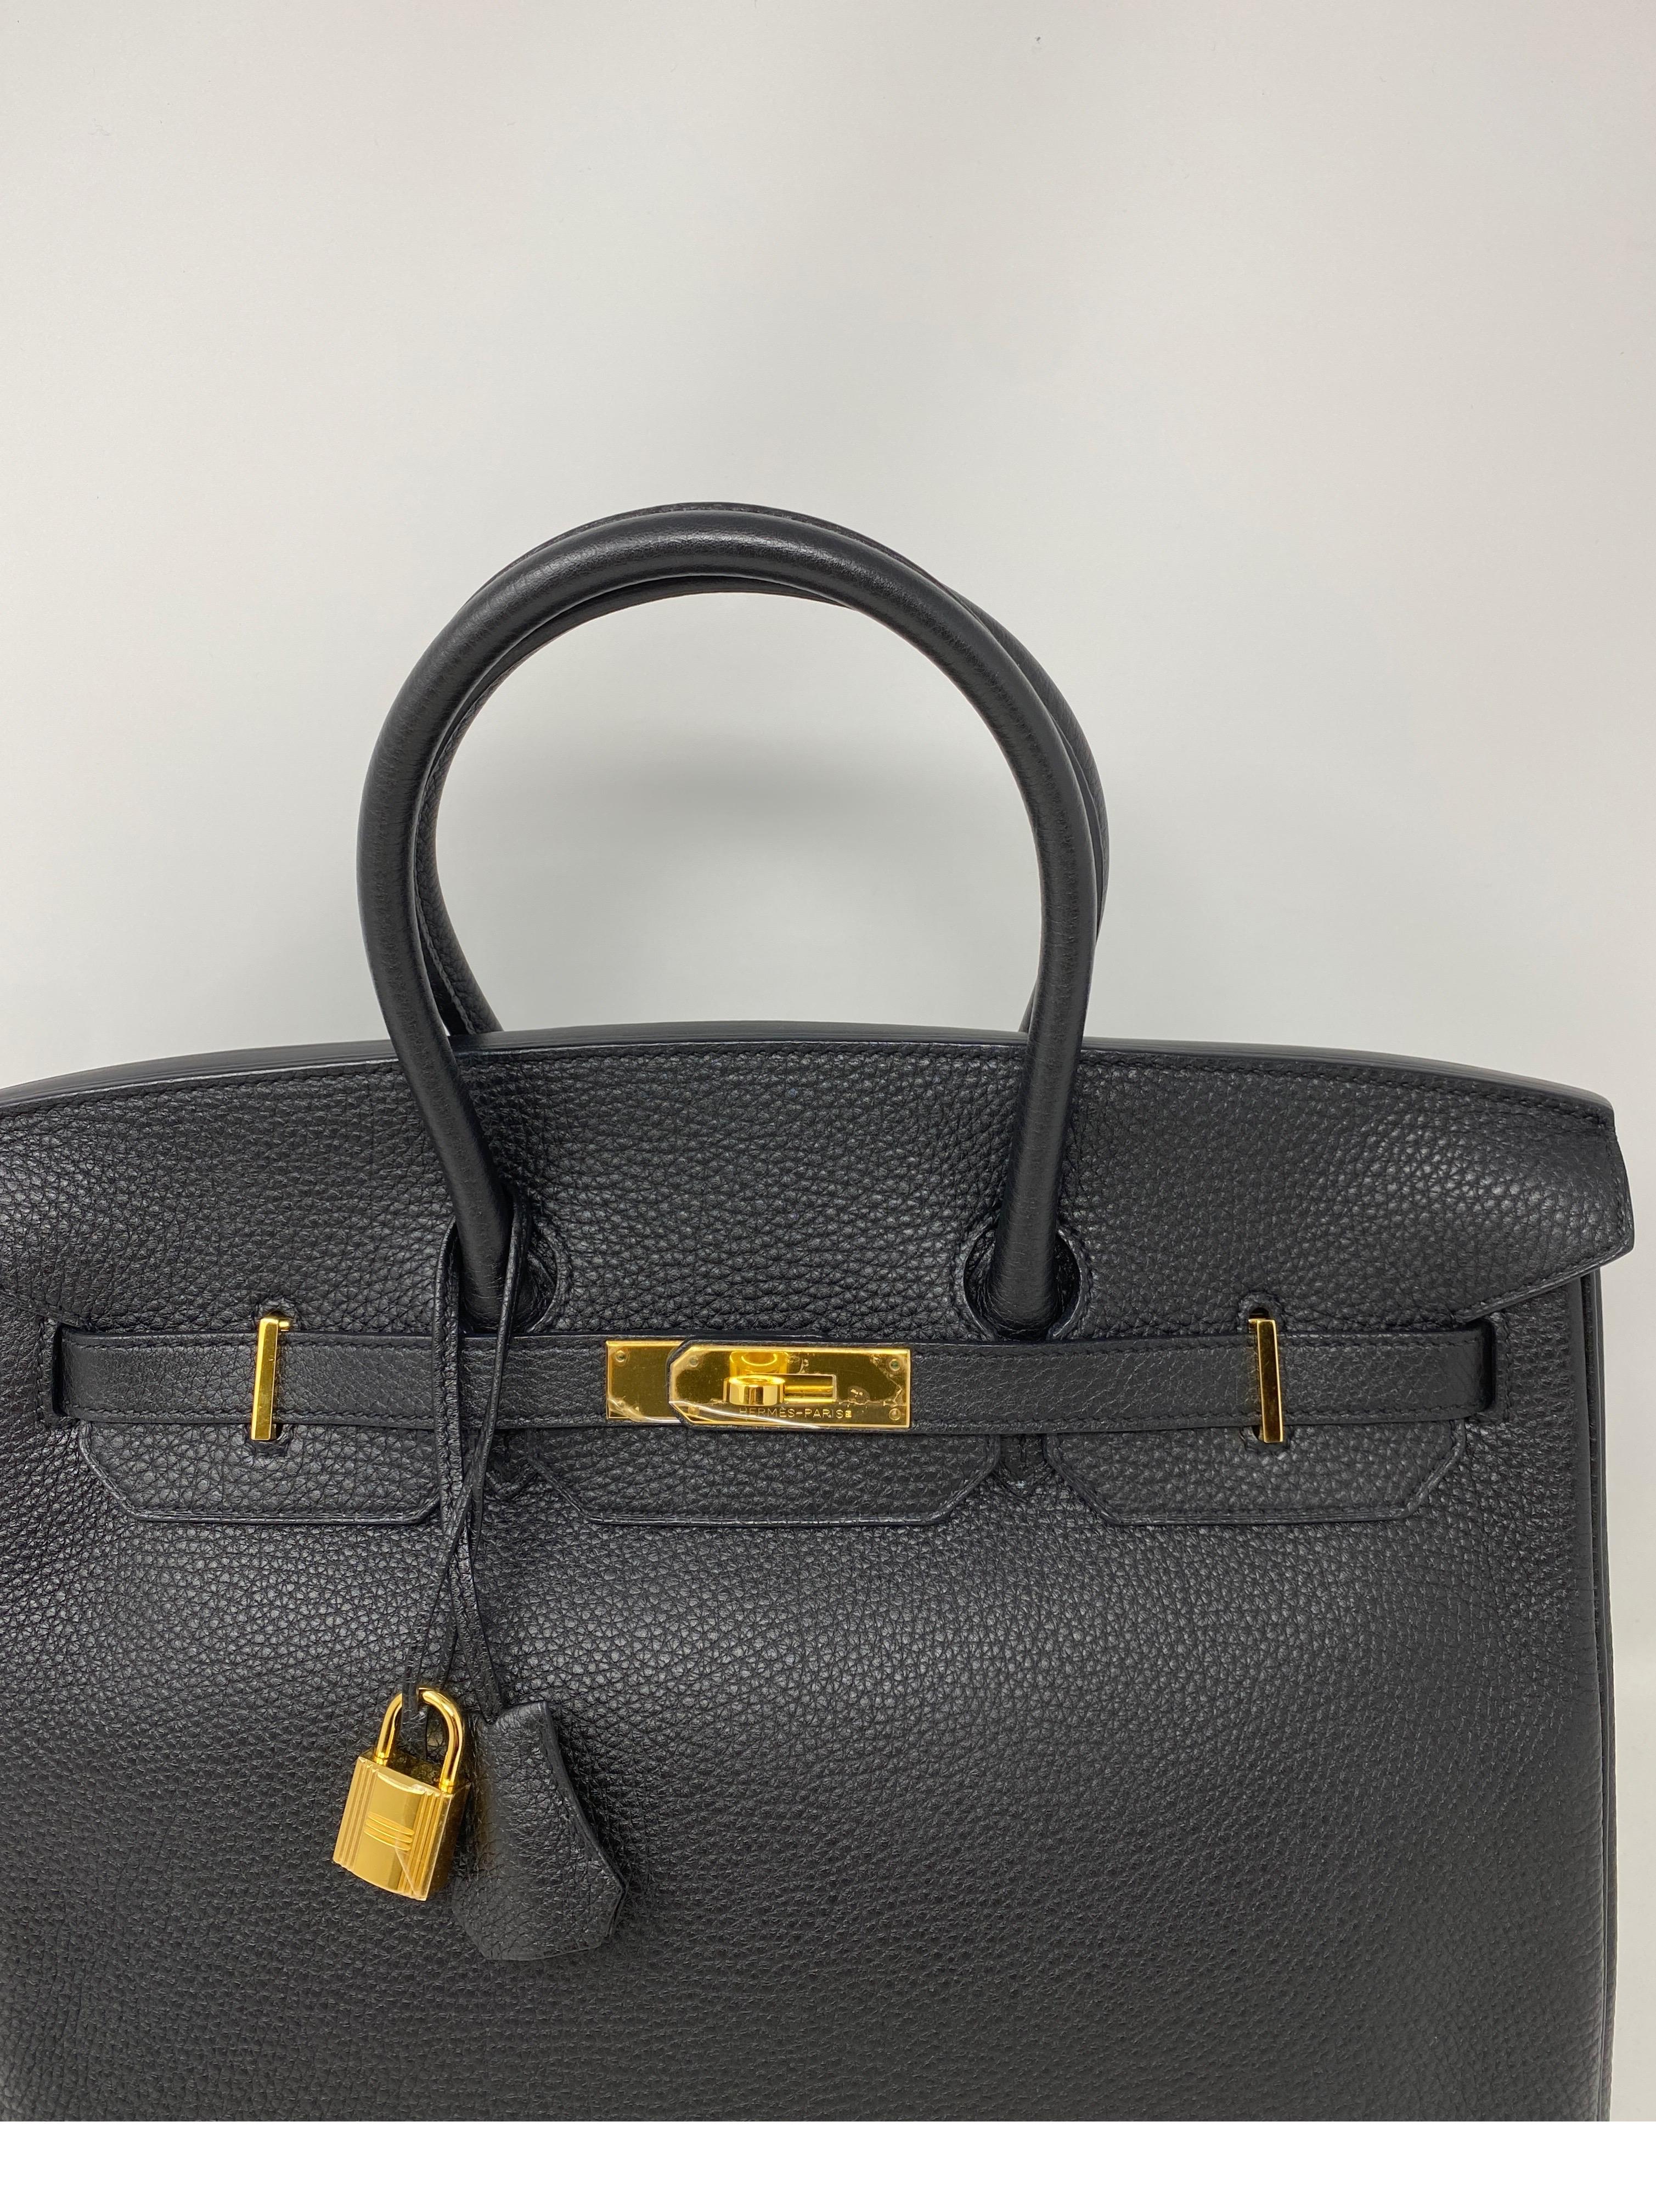 Hermes Black Birkin 35 Bag. Gold hardware. Excellent like new condition. Most wanted combo. Hard to find black and gold. From 2012. Comes with receipt and Bababebi certificate. Includes clochette, lock, keys, and dust cover. Guaranteed authentic. 